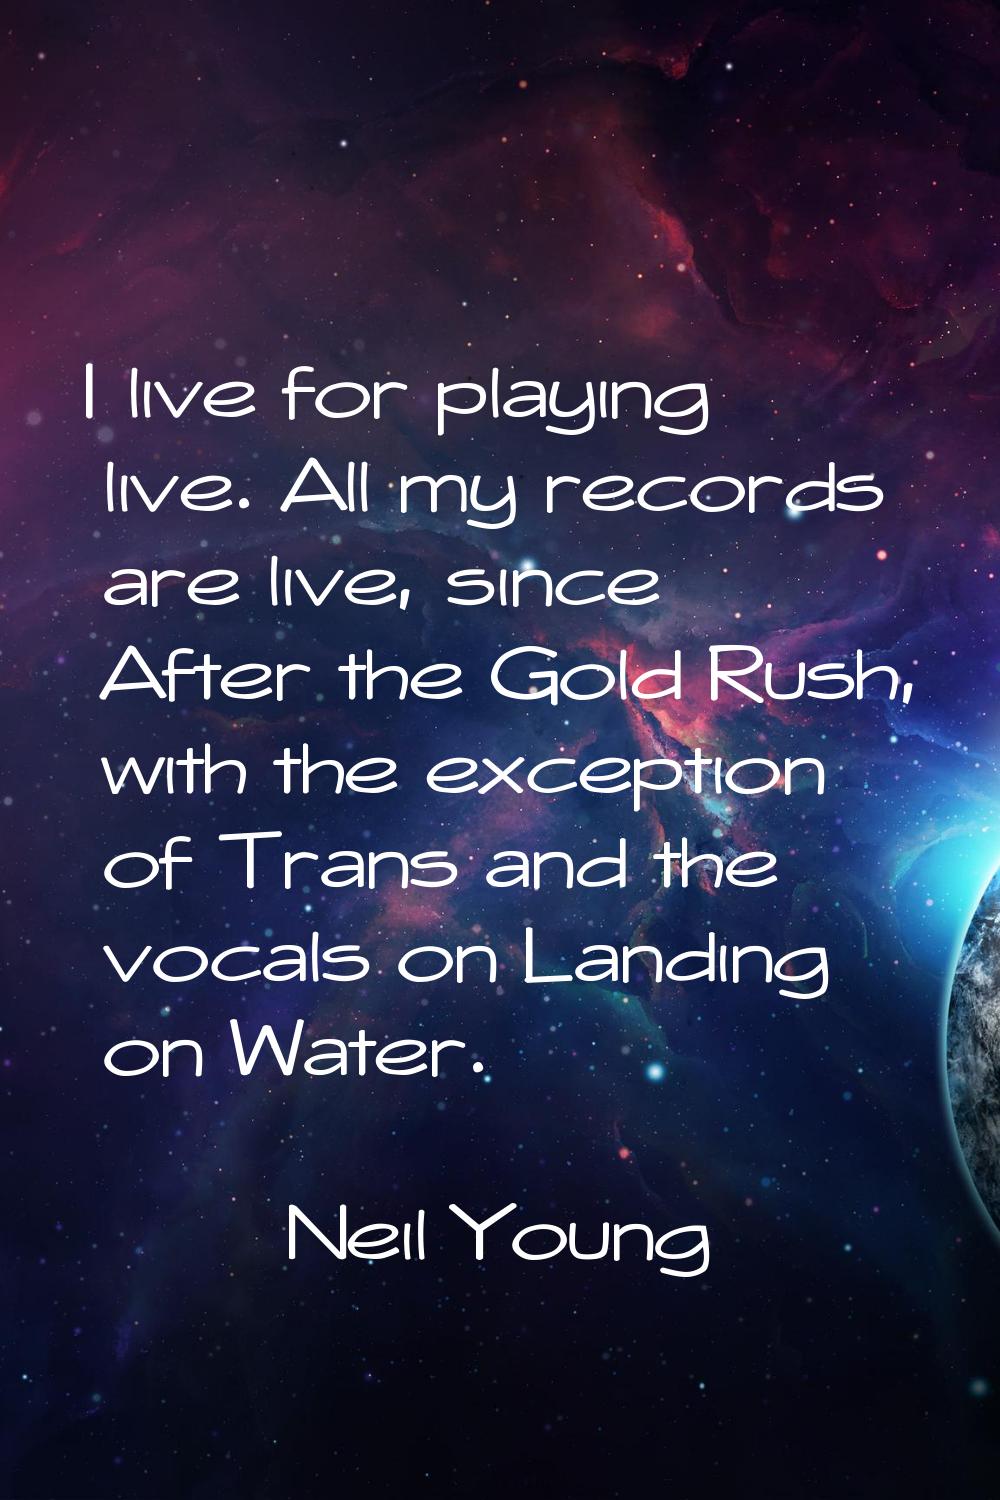 I live for playing live. All my records are live, since After the Gold Rush, with the exception of 